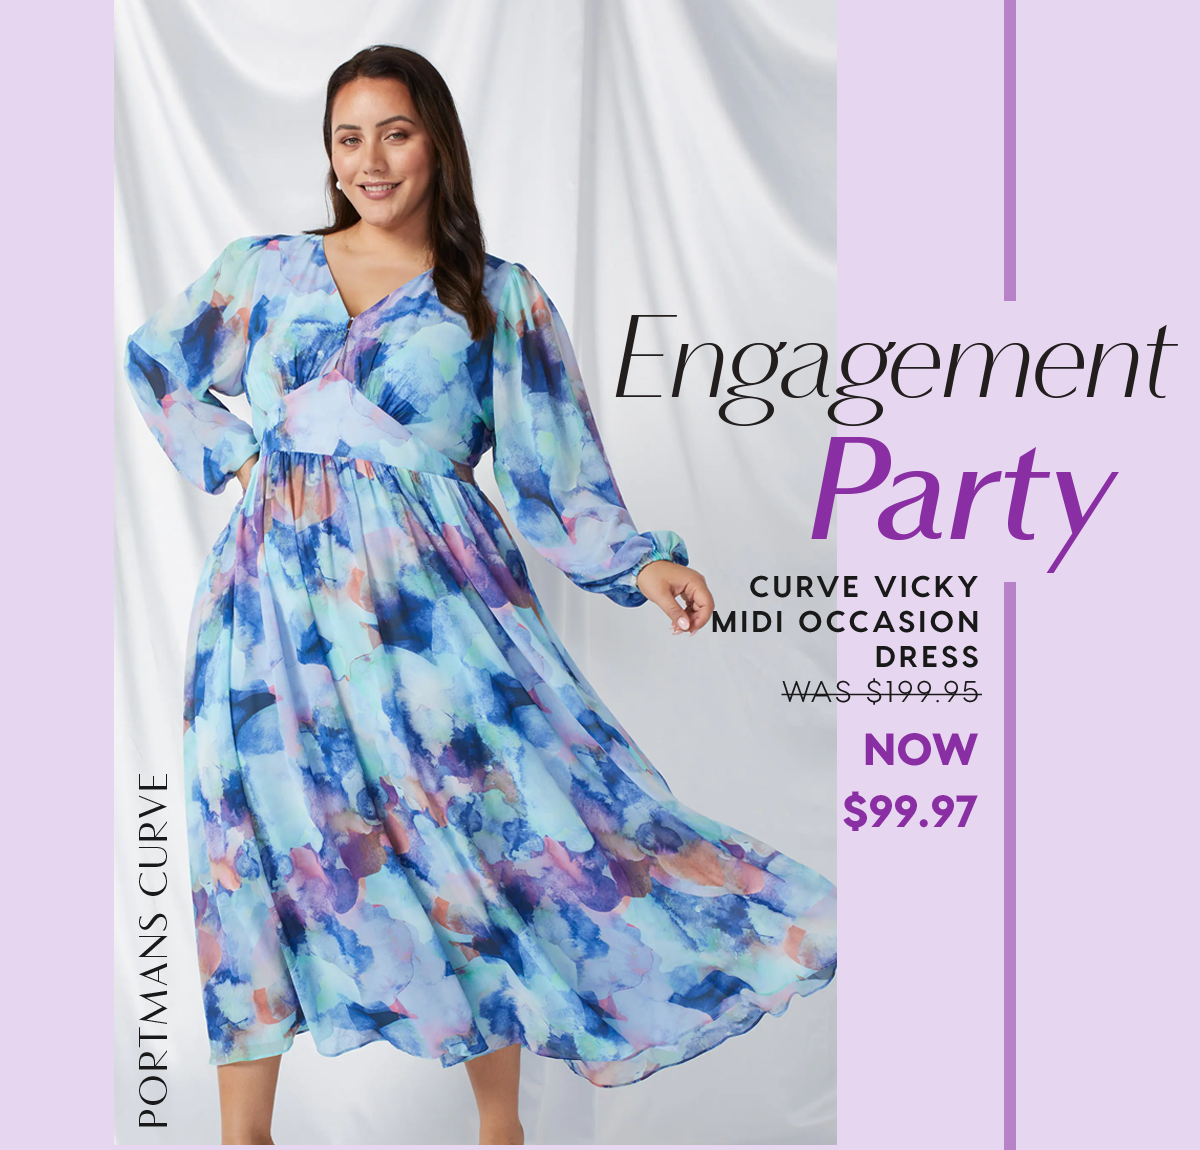 Engagement Party. Curve Vicky  Midi Occasion Dress WAS $199.95 NOW $99.97